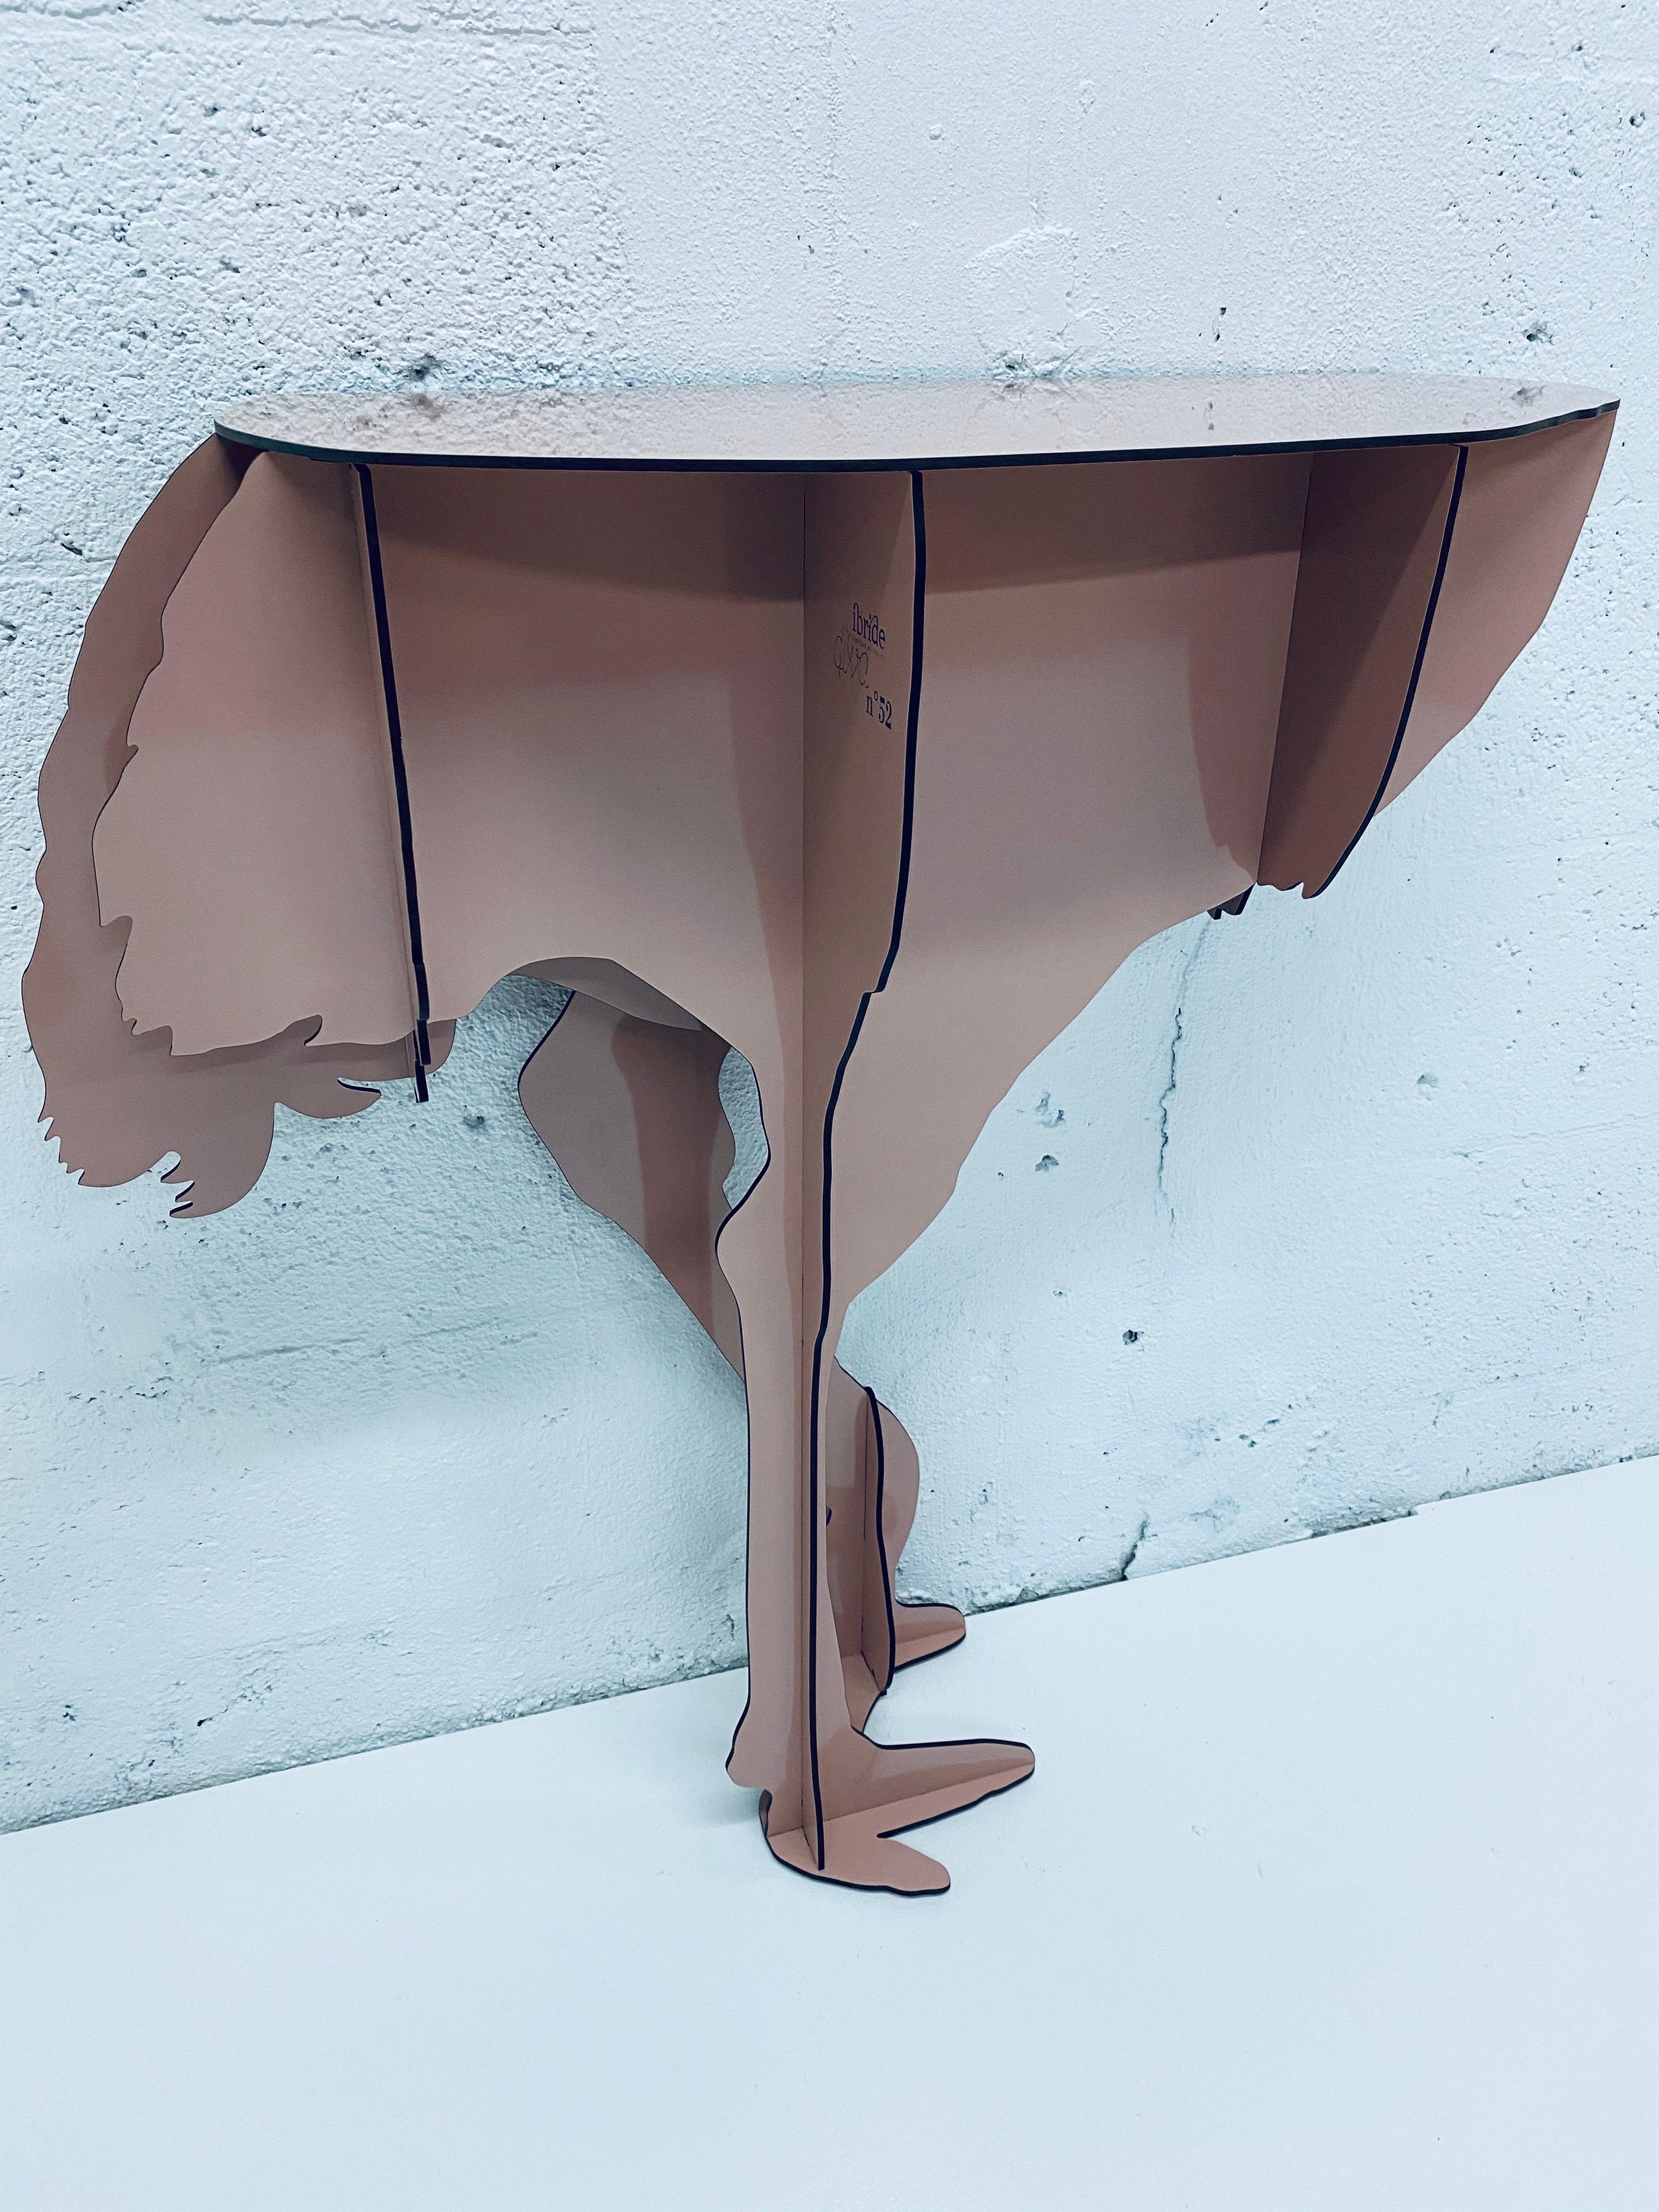 Designed by Rachel and Benoît Convers in 2006, the Diva console table makes a delightfully eccentric addition to any interior scheme. This dusty pink console is a limited edition piece for the 10th Anniversary of the table and is signed and numbered